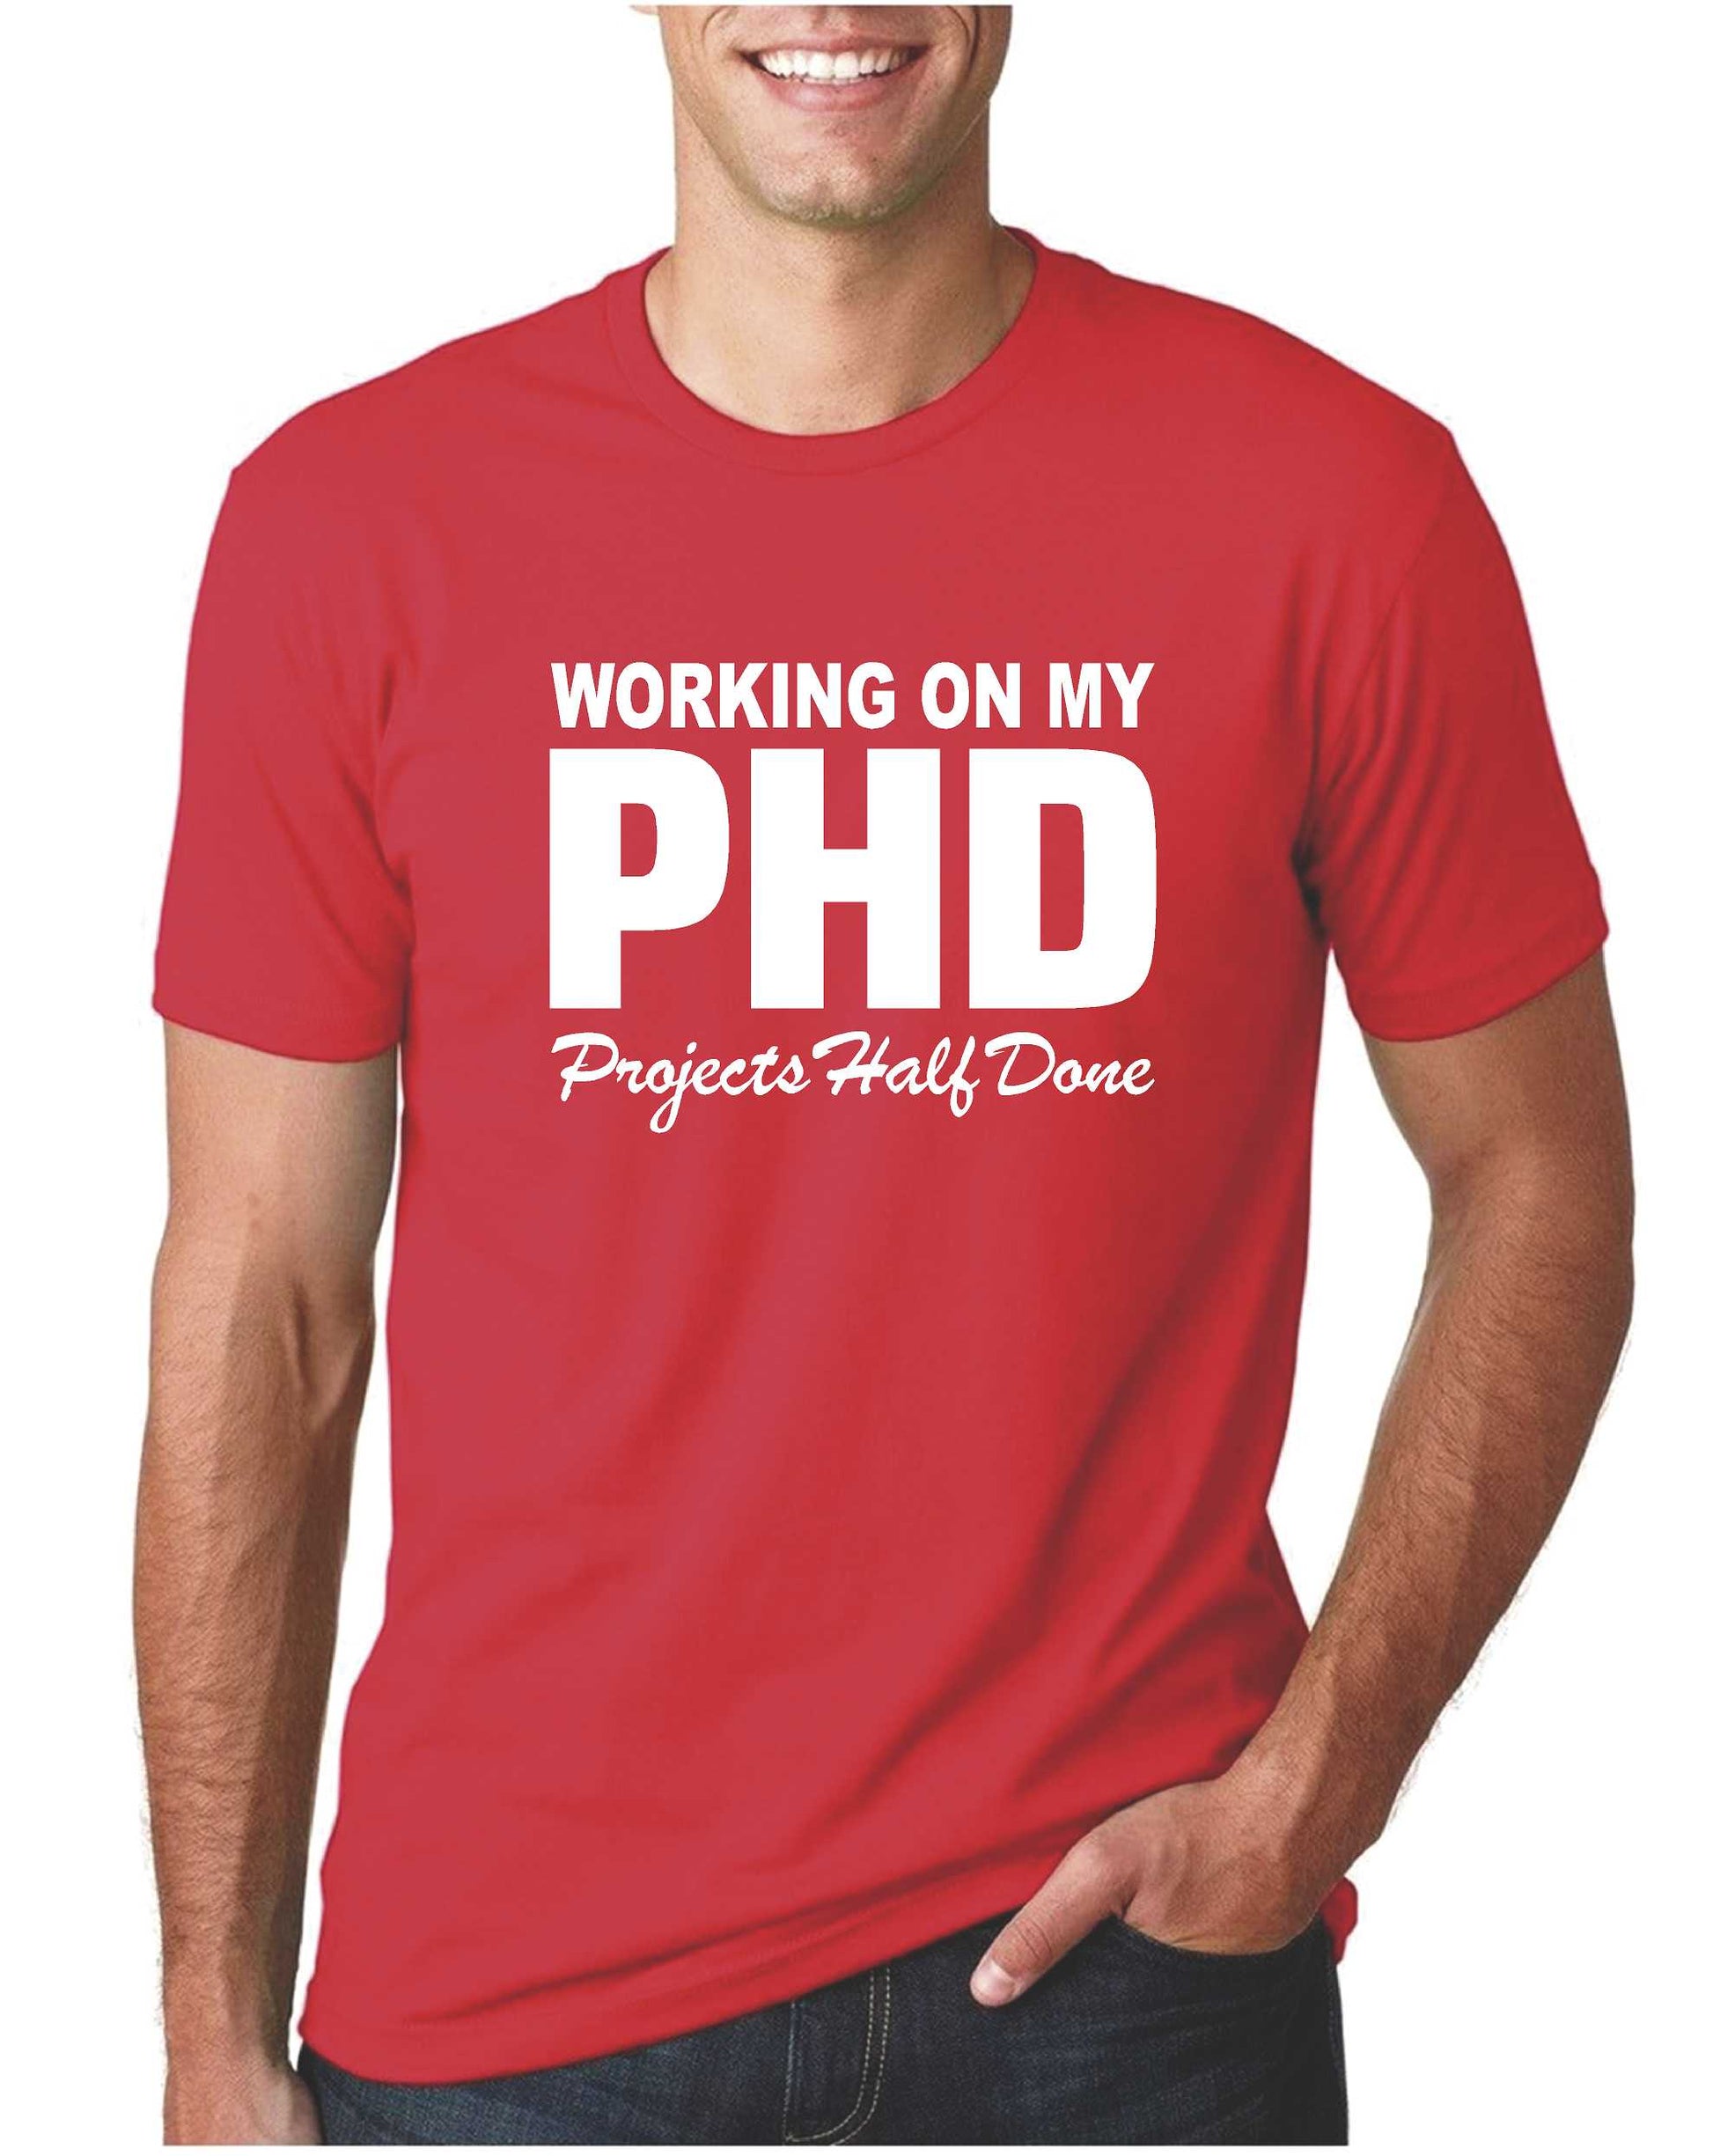 Mens Working on PHD Projects Half Done Funny T-Shirt Our Shirt Shack